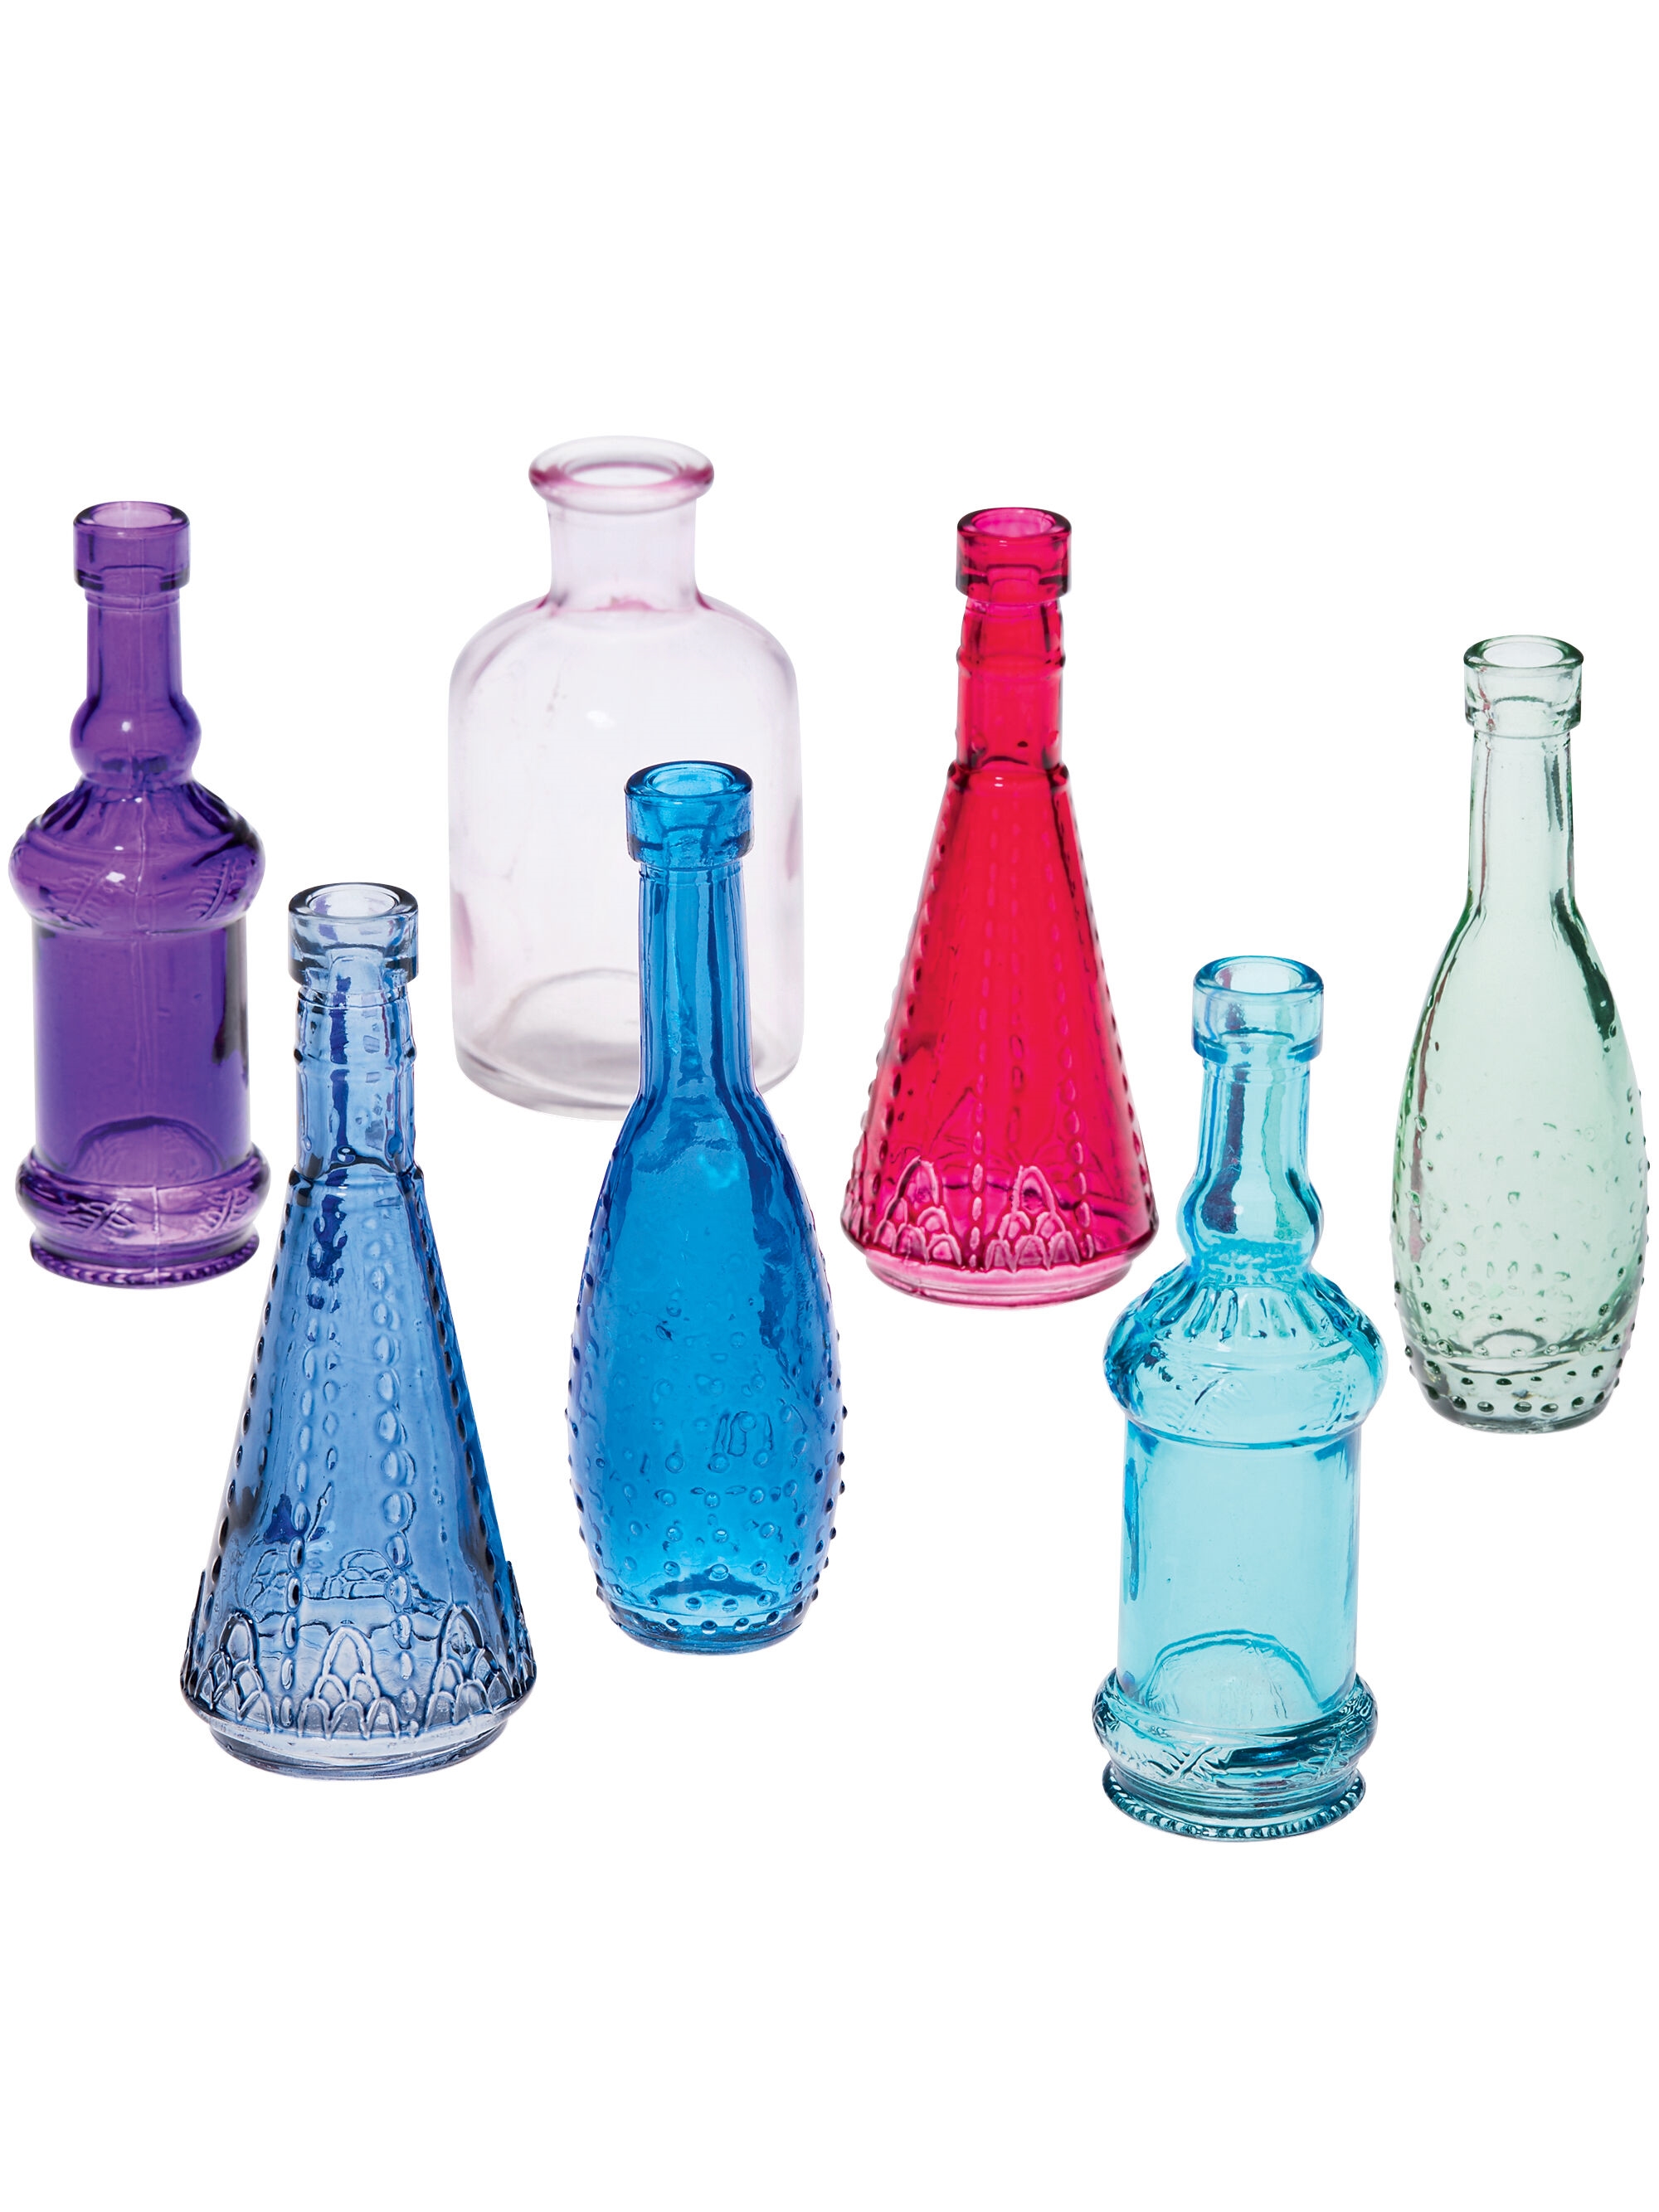 Colored Glass Bottles - Multiple Colors Available